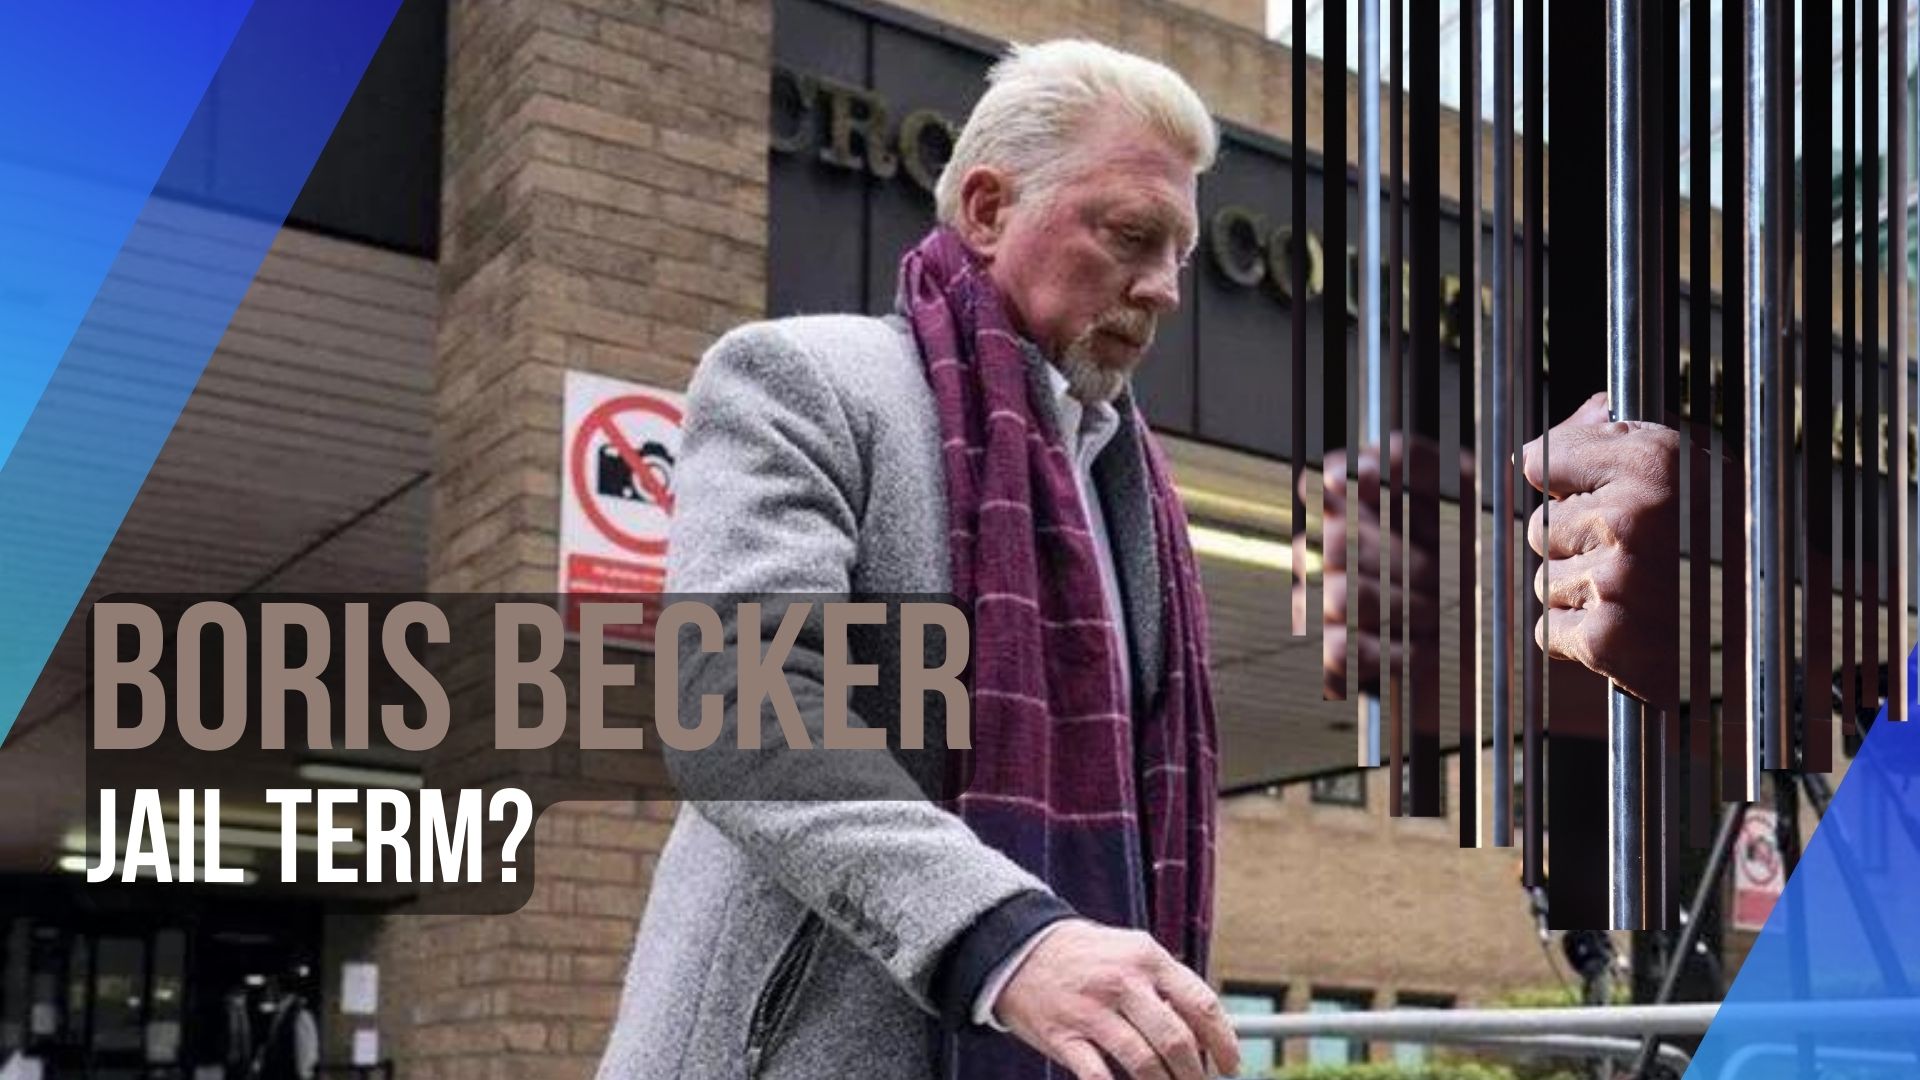 Tennis Legend Boris Becker could face 7 years jail for concealing assets from insolvency